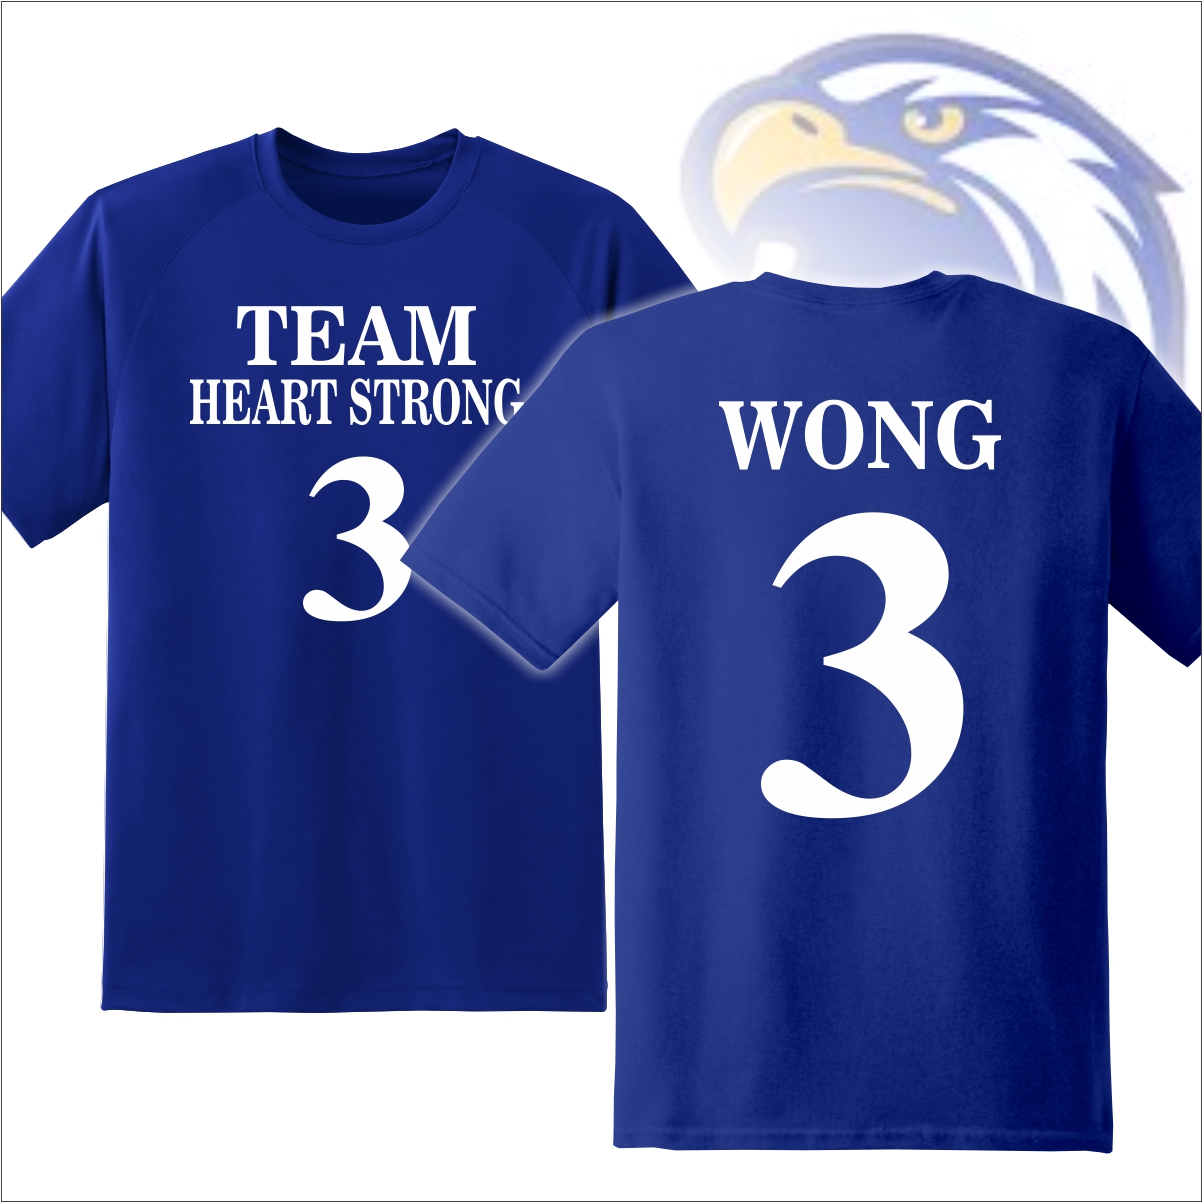 ateneo volleyball jersey